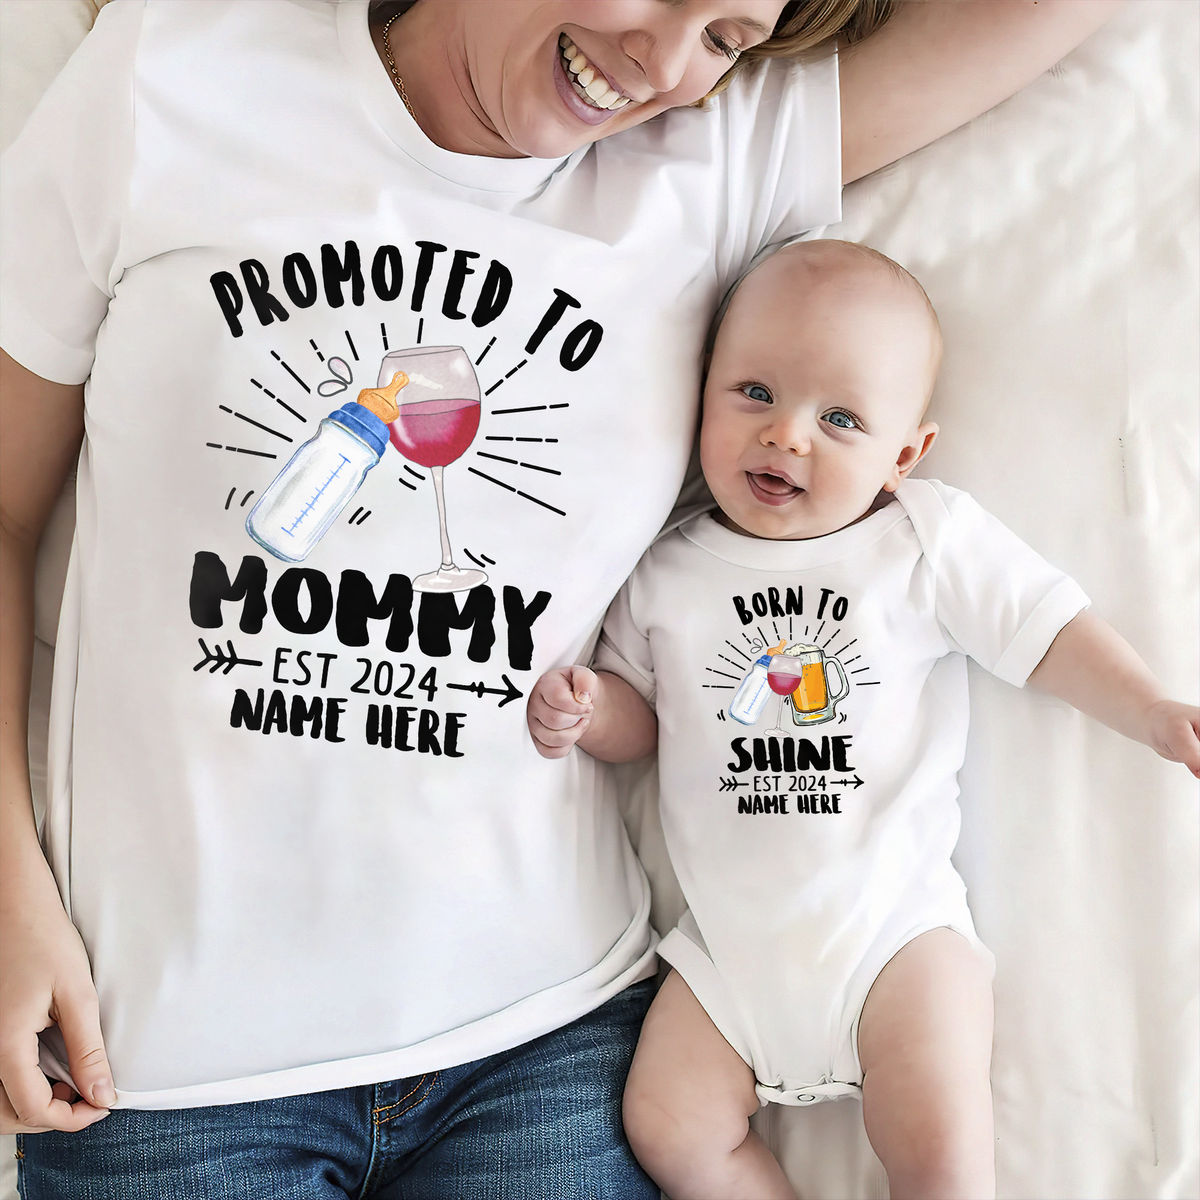 Personalized Shirt - Mother's Day Gifts - Promoted To Mommy - New Mom Gifts - Gifts For Mom - Mother's Day Shirts_2